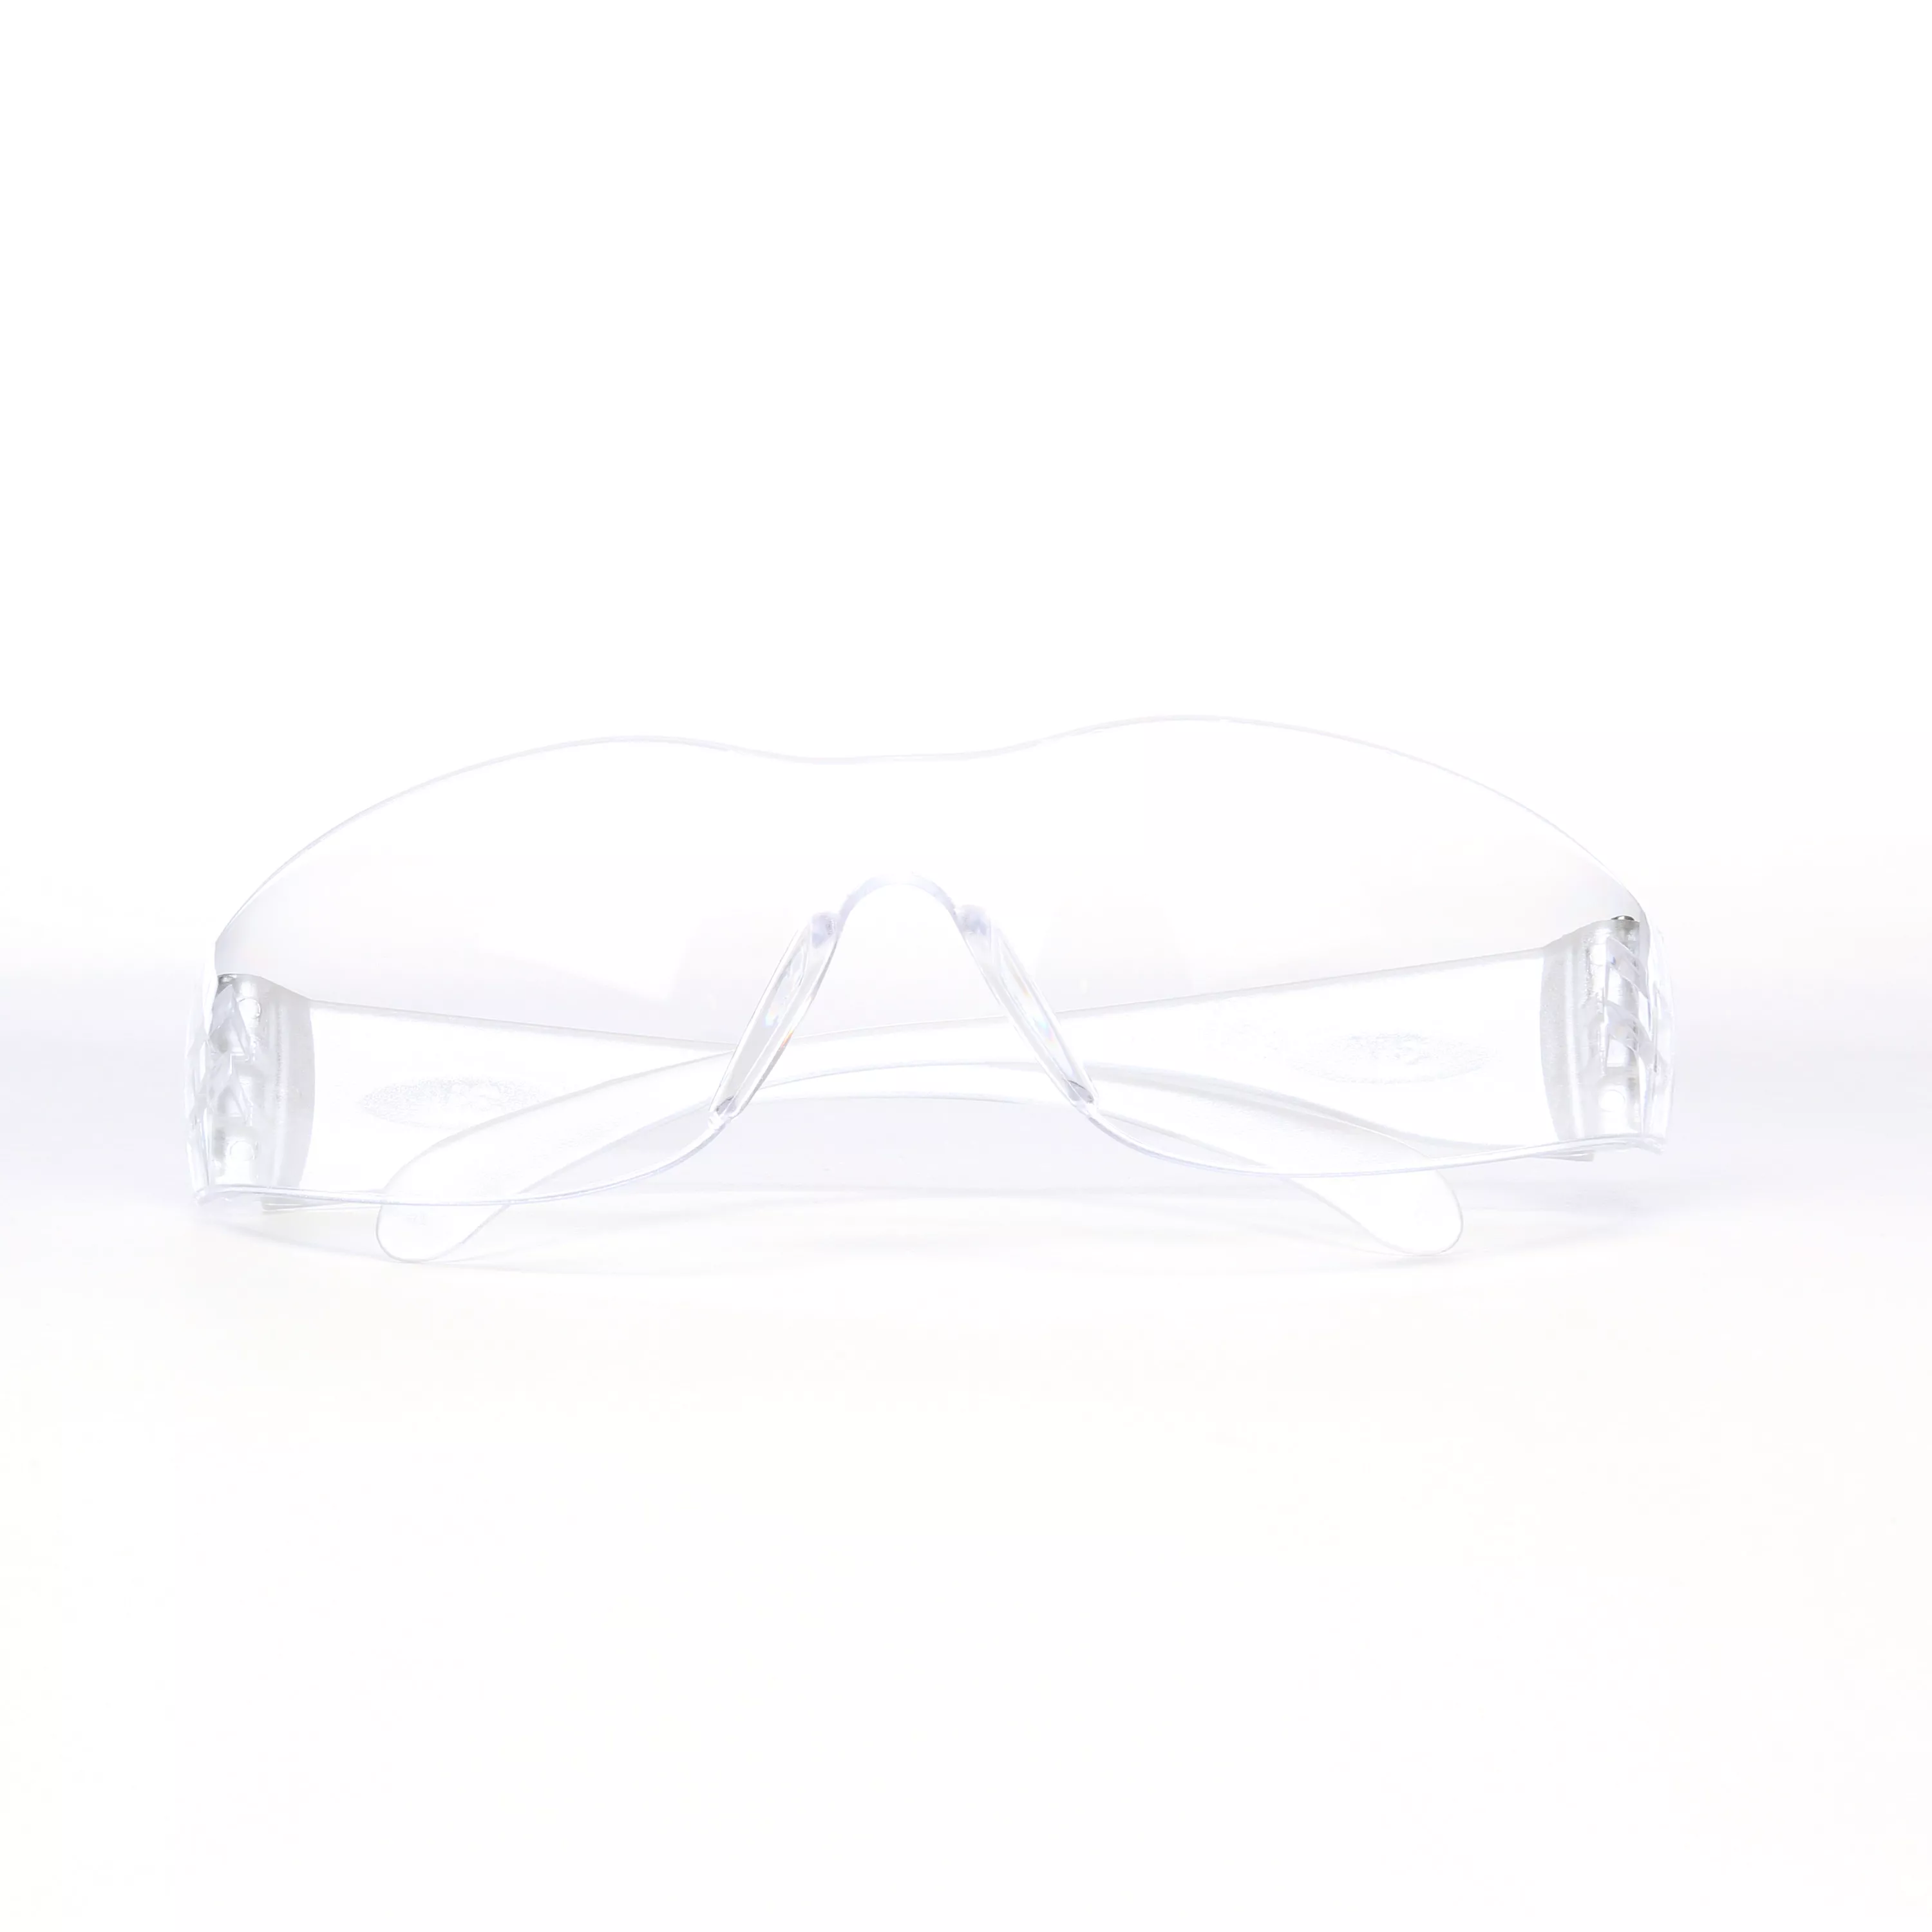 3M™ Virtua™ Protective Eyewear 11228-00000-100 Clear Uncoated Lens,
Clear Temple 100 EA/Case